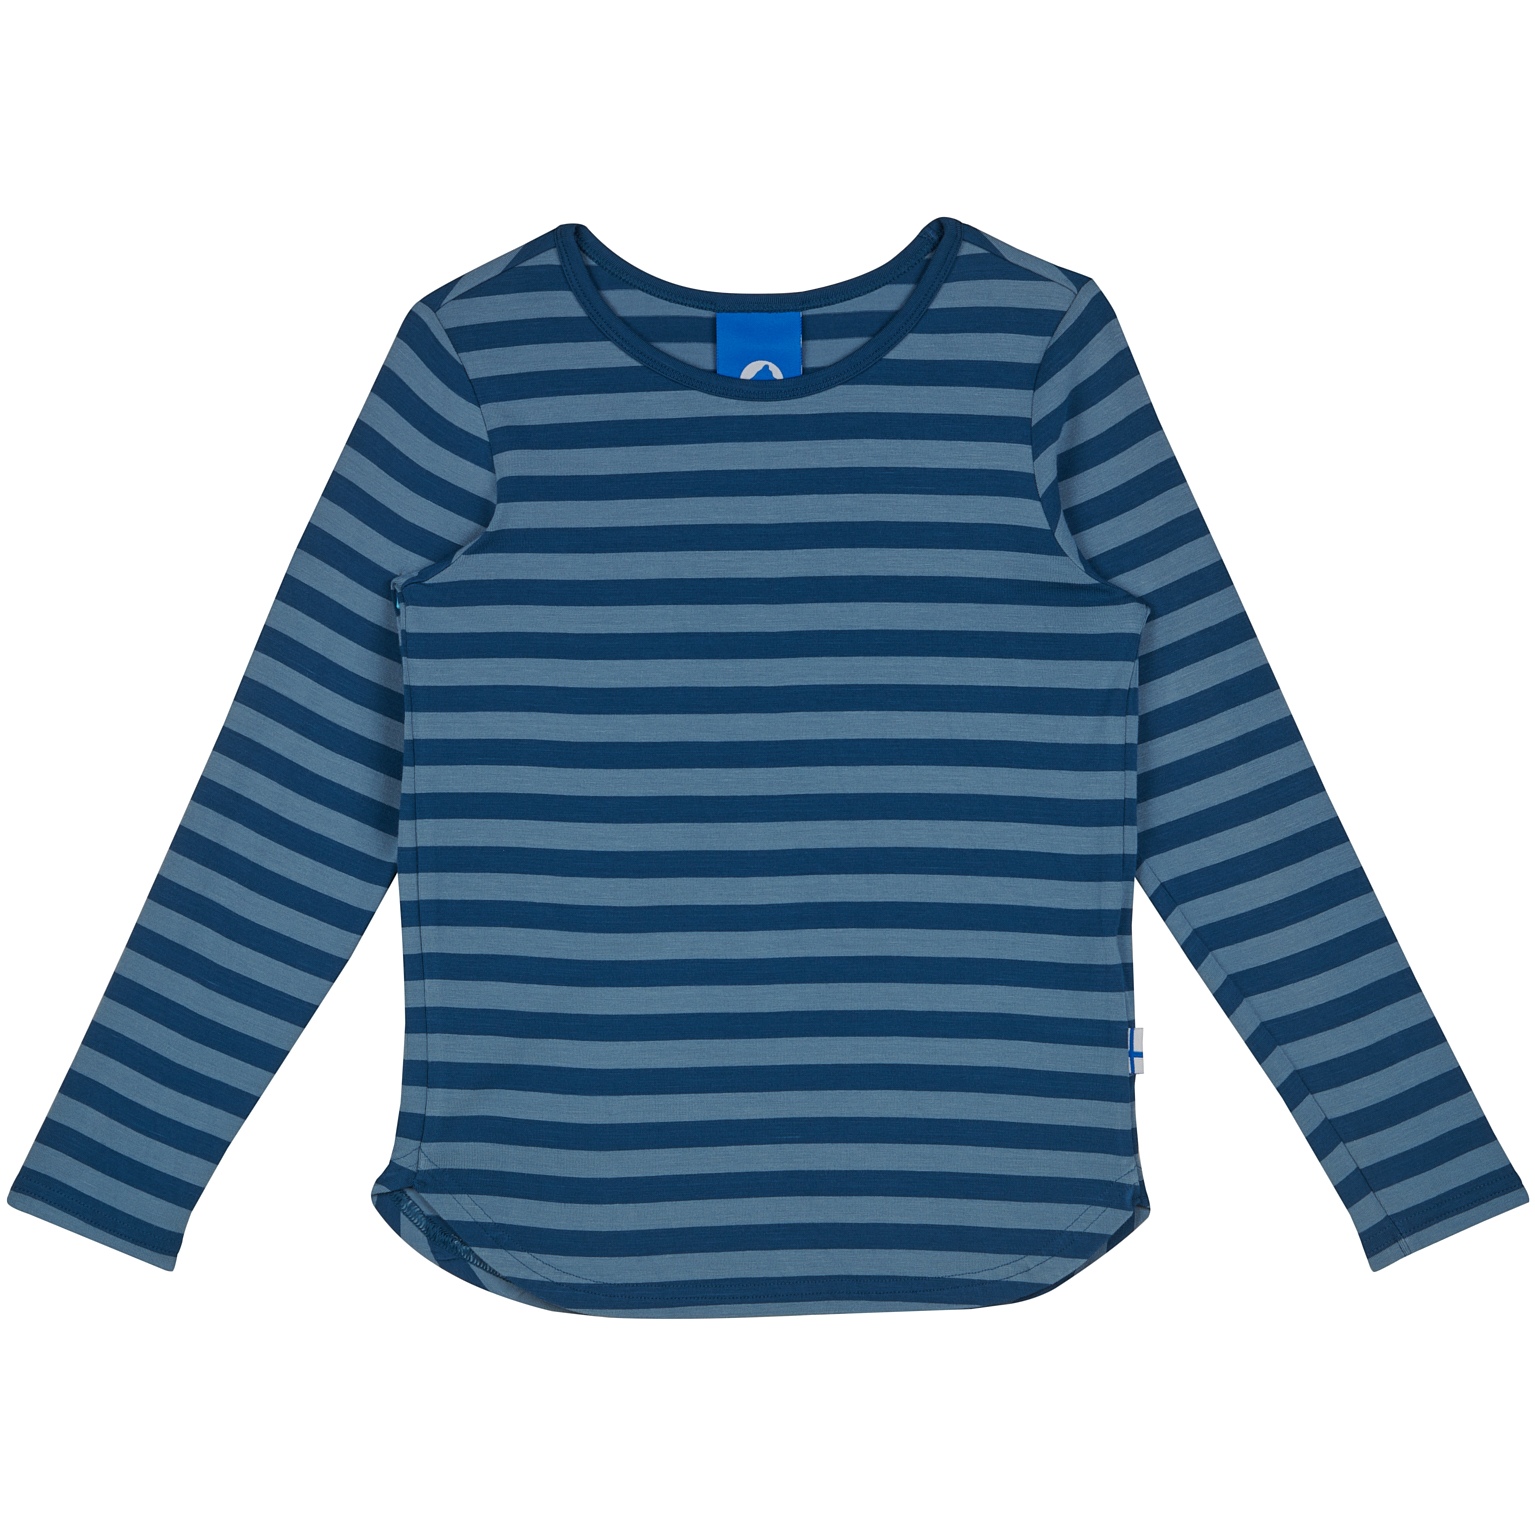 Picture of Finkid MERISILLI Jersey Longsleeve Shirt Kids - dove/real teal